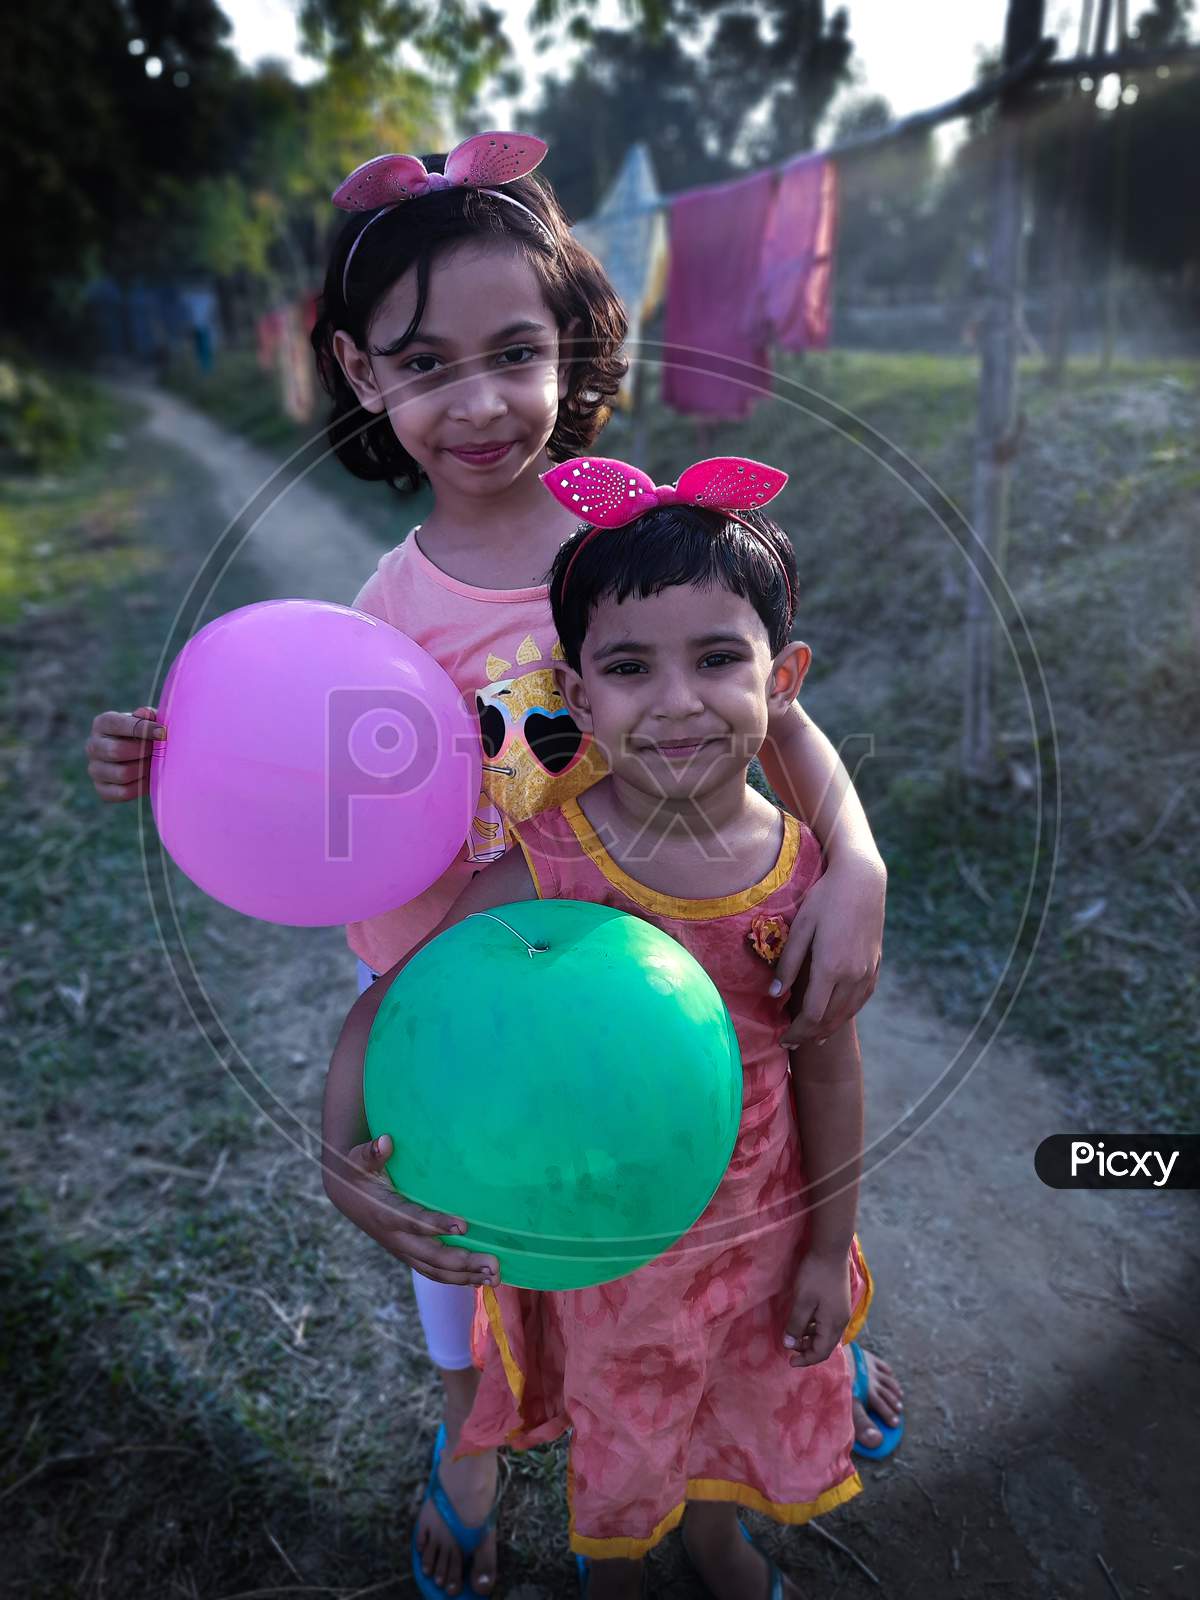 Children play with balloon